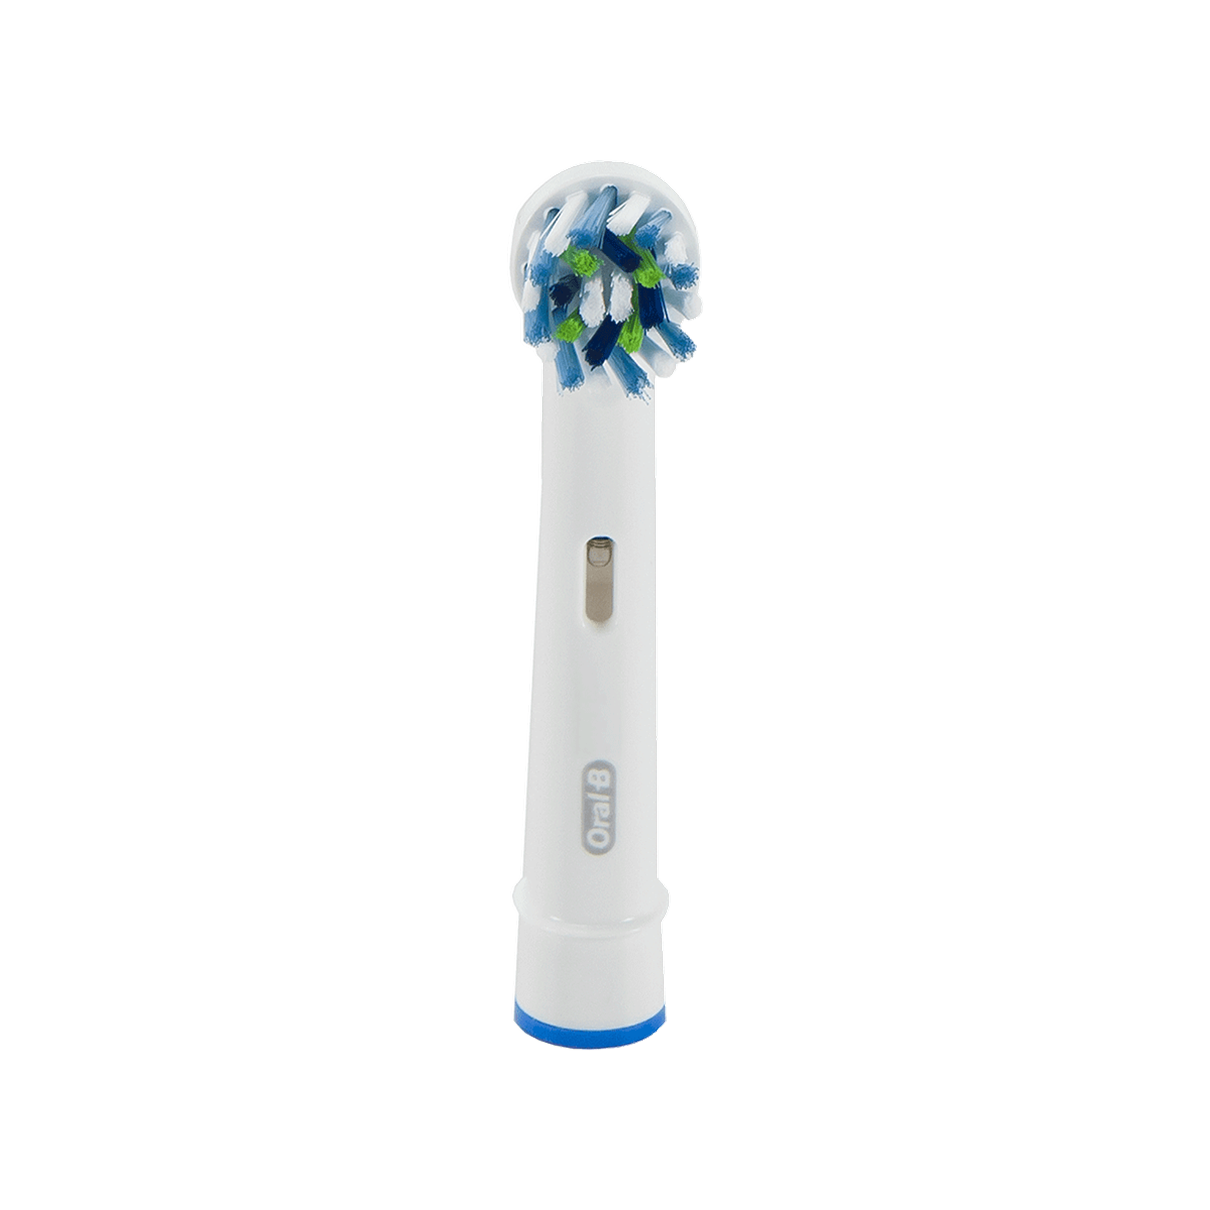 Best Oral-B electric toothbrush head; Oral-B Cross Action